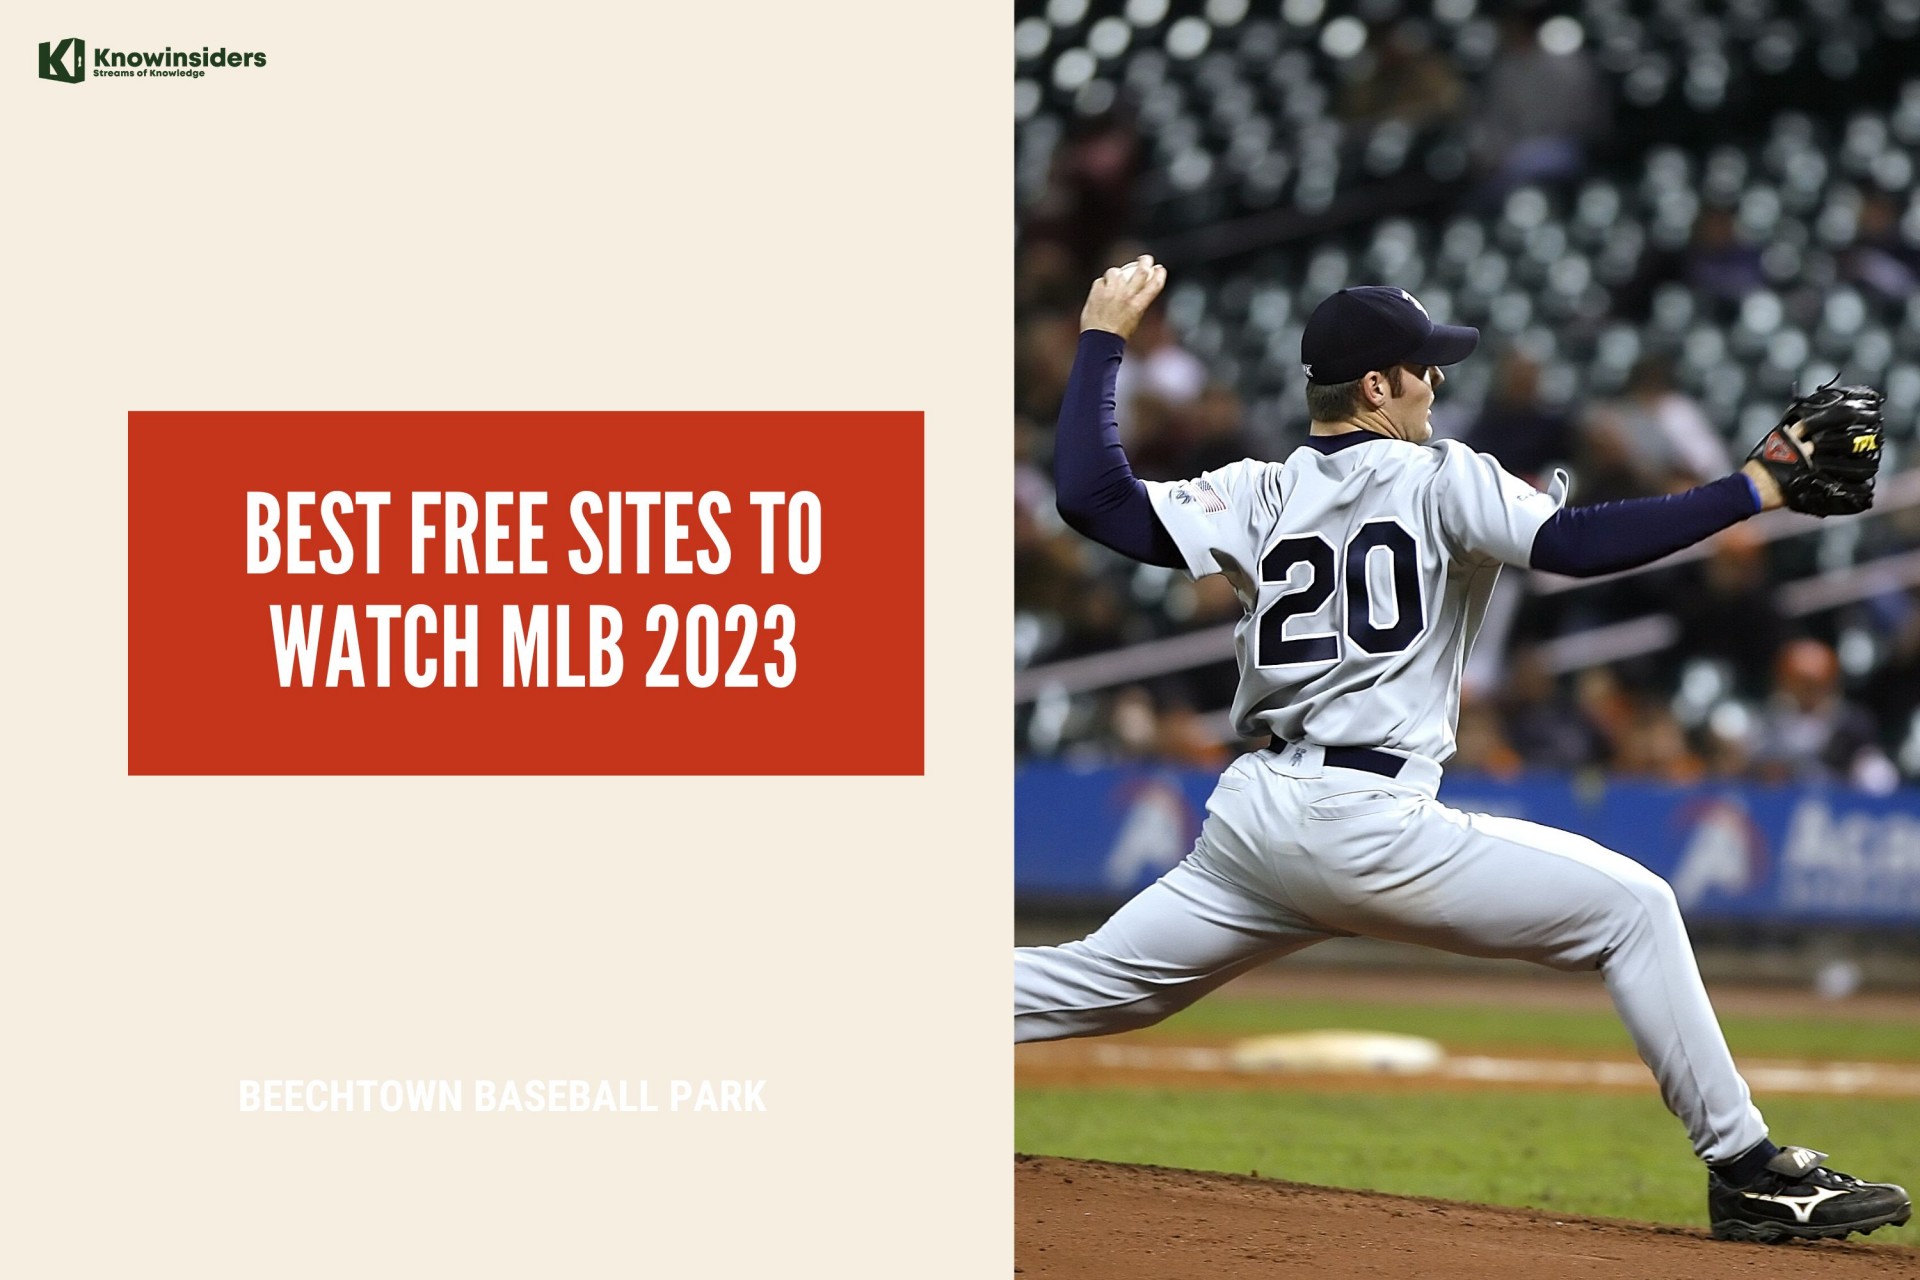 Top 12 Free Sites To Watch Live MLB 2023 Games Without Cable